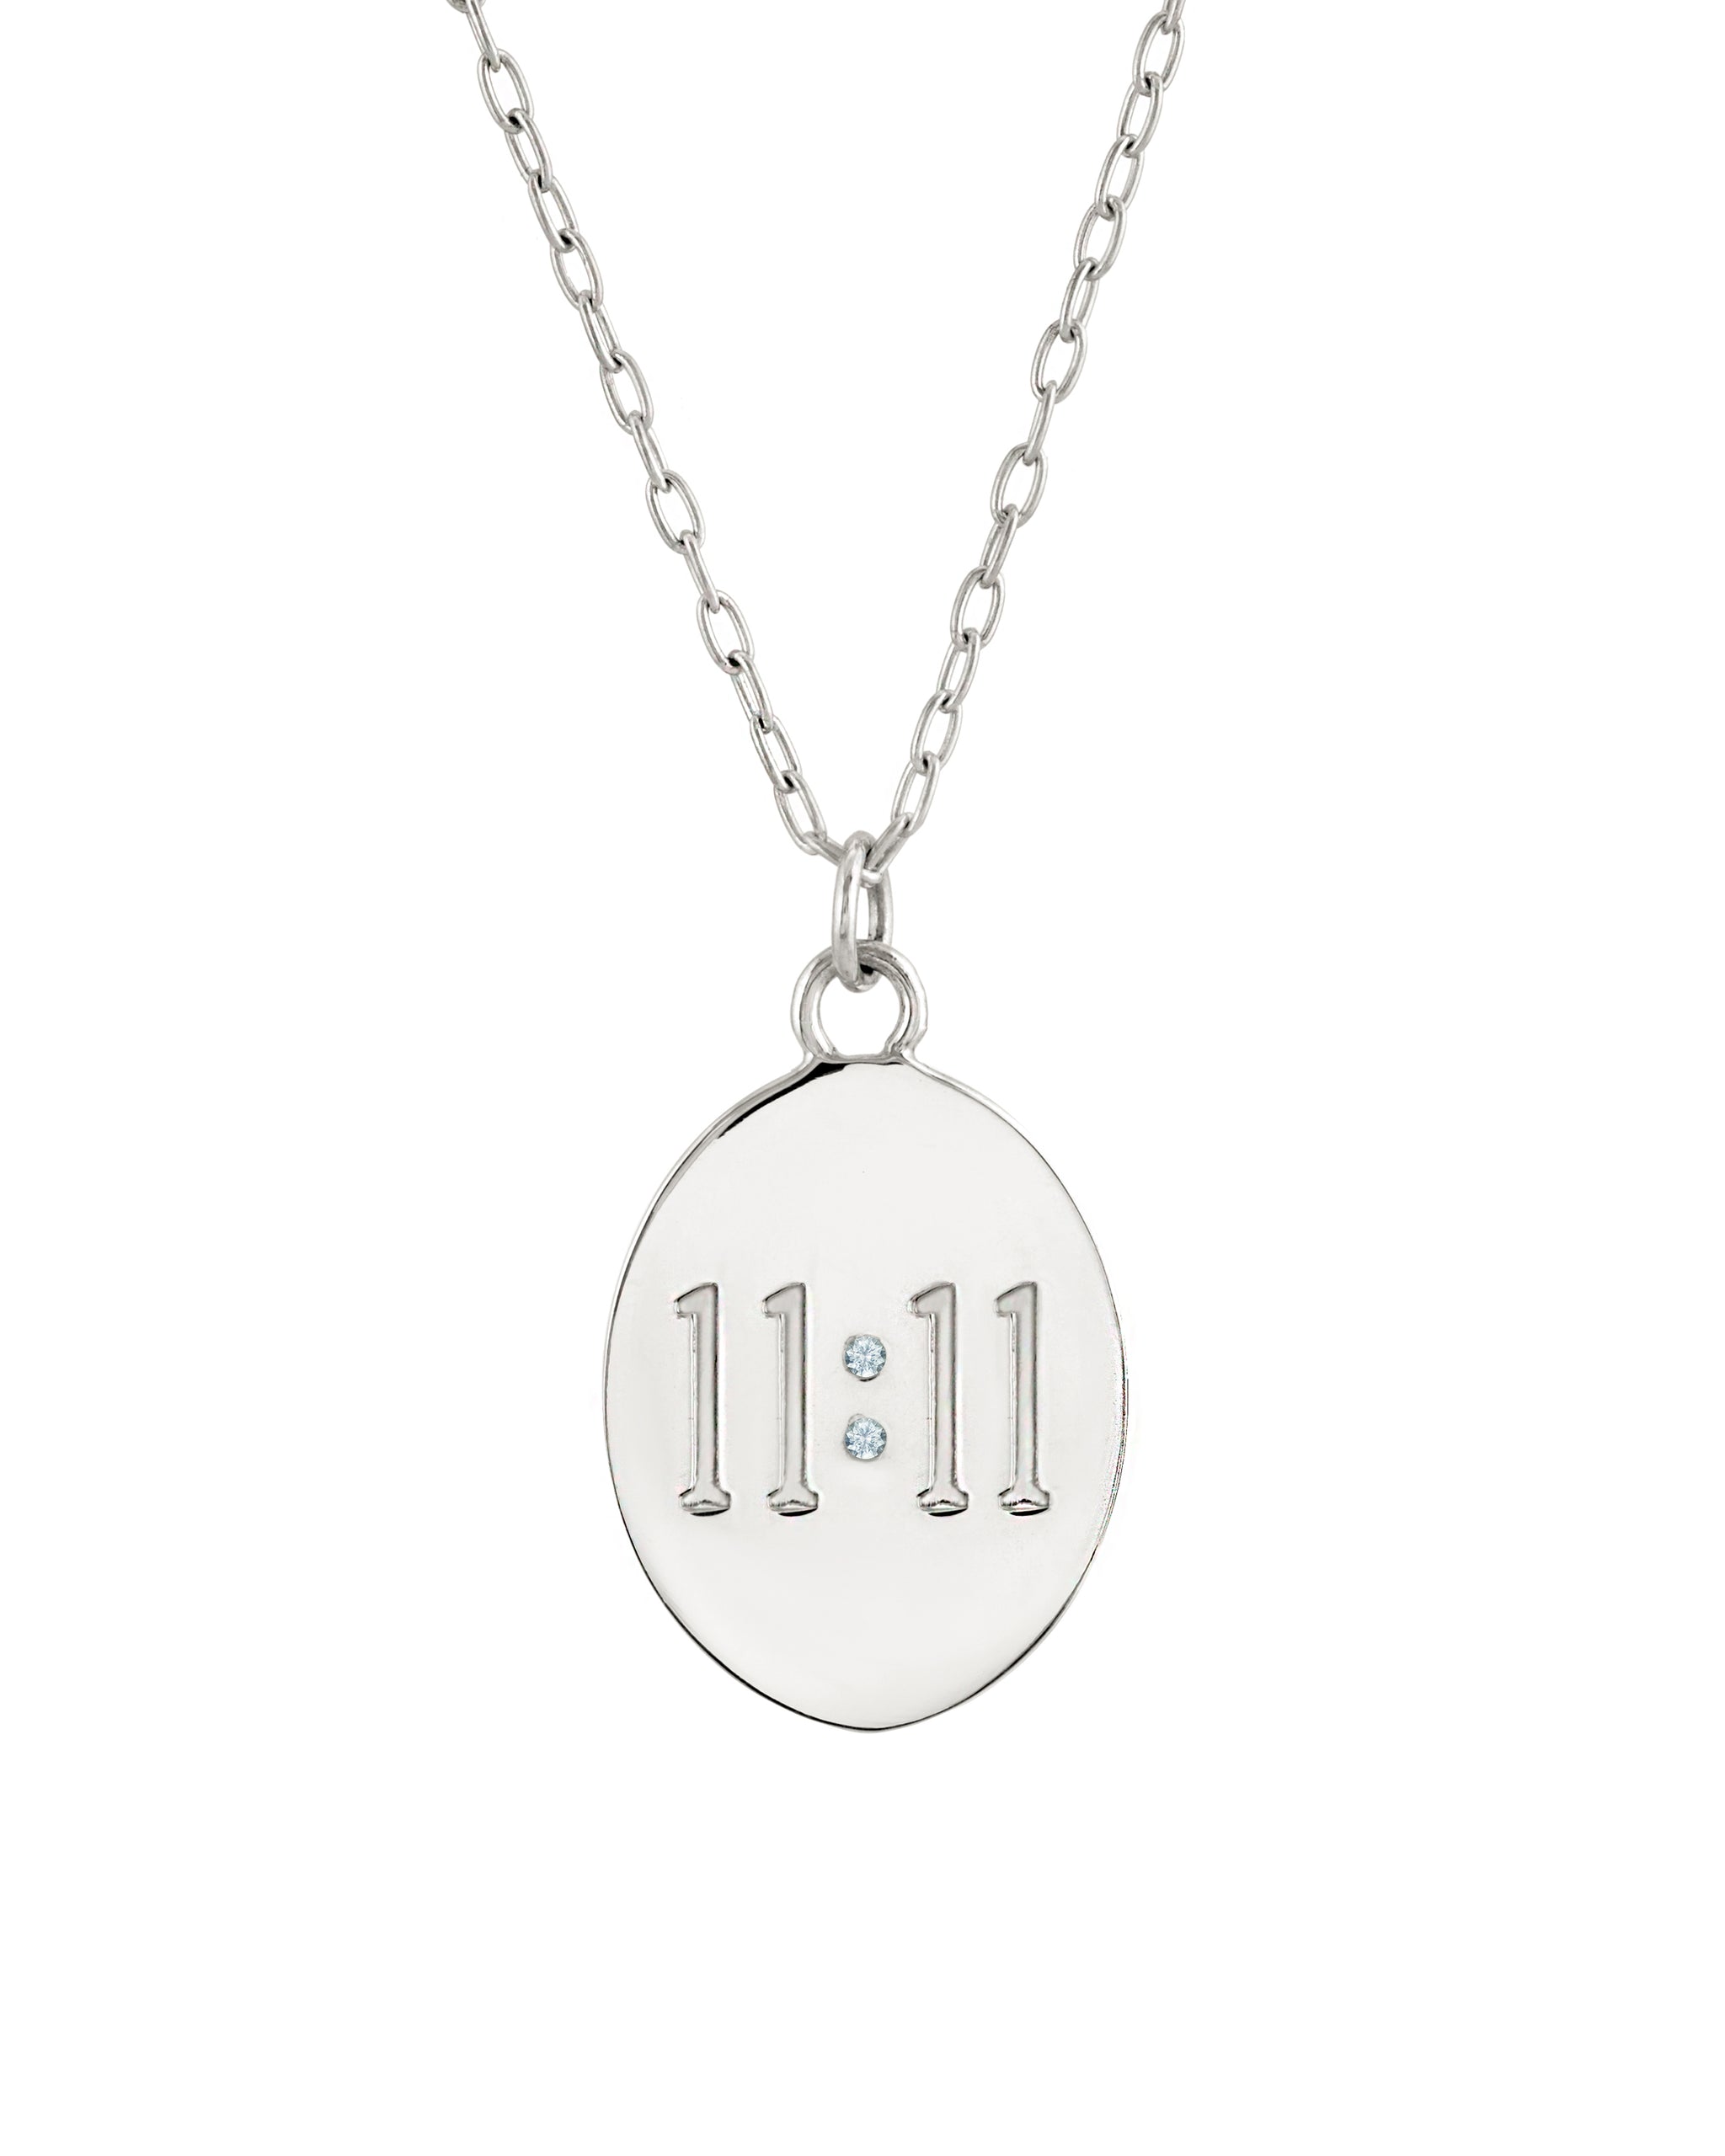 11:11 NECKLACE